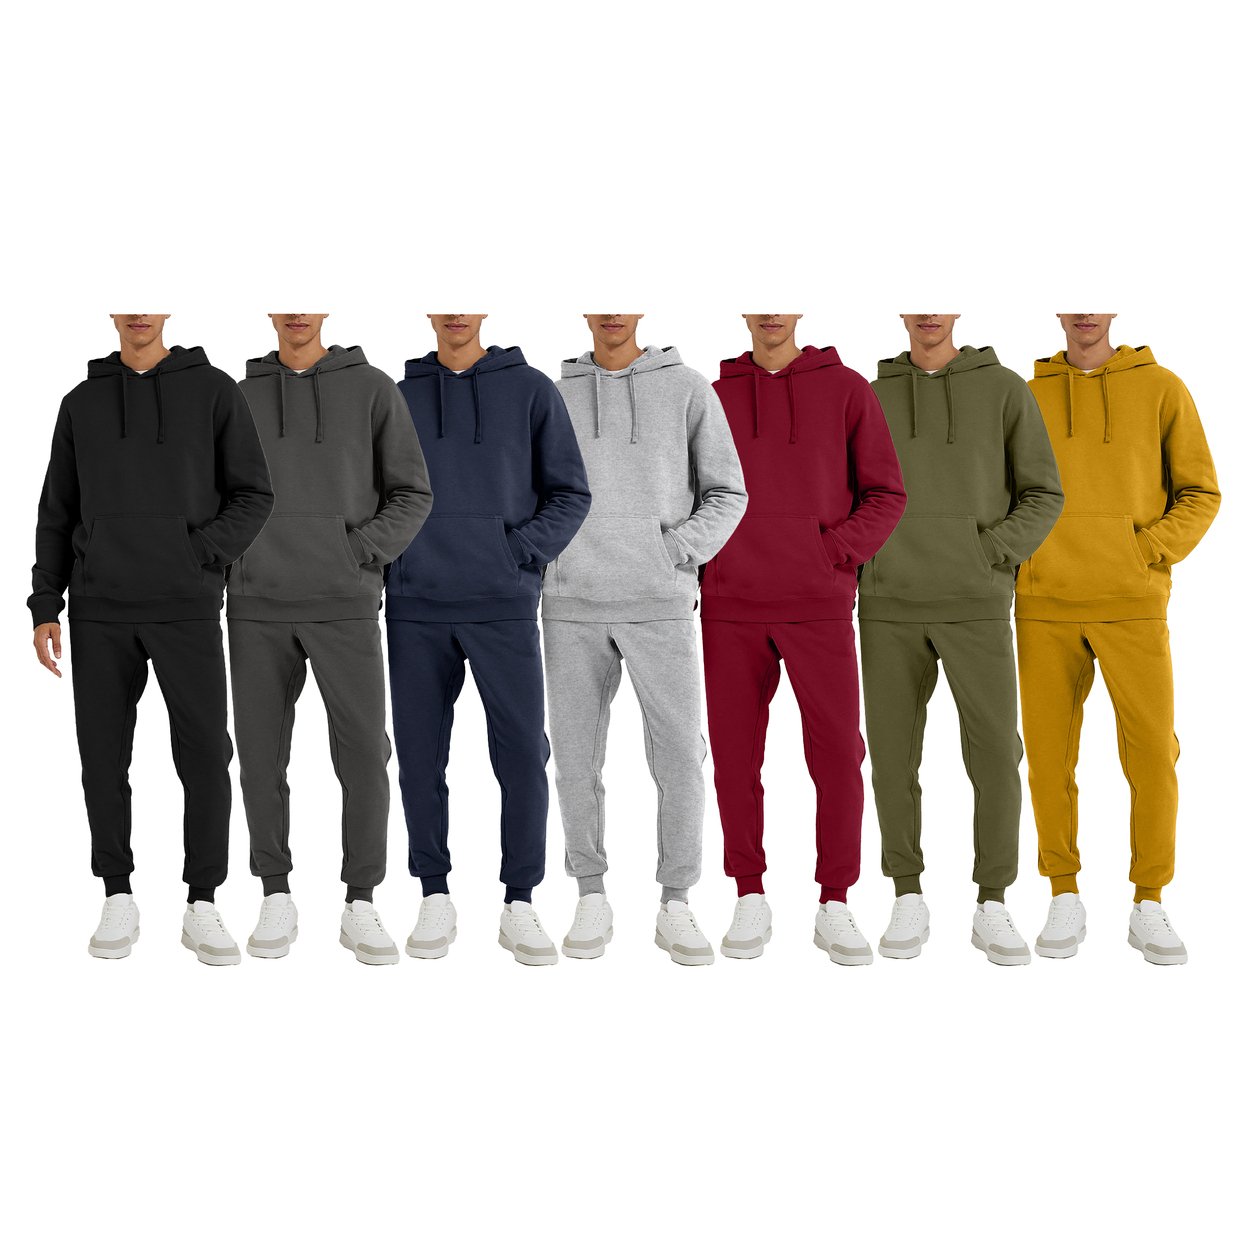 Multi-Pack: Men's Big & Tall Athletic Active Jogging Winter Warm Fleece Lined Pullover Tracksuit Set - Grey, 1-pack, Xx-large